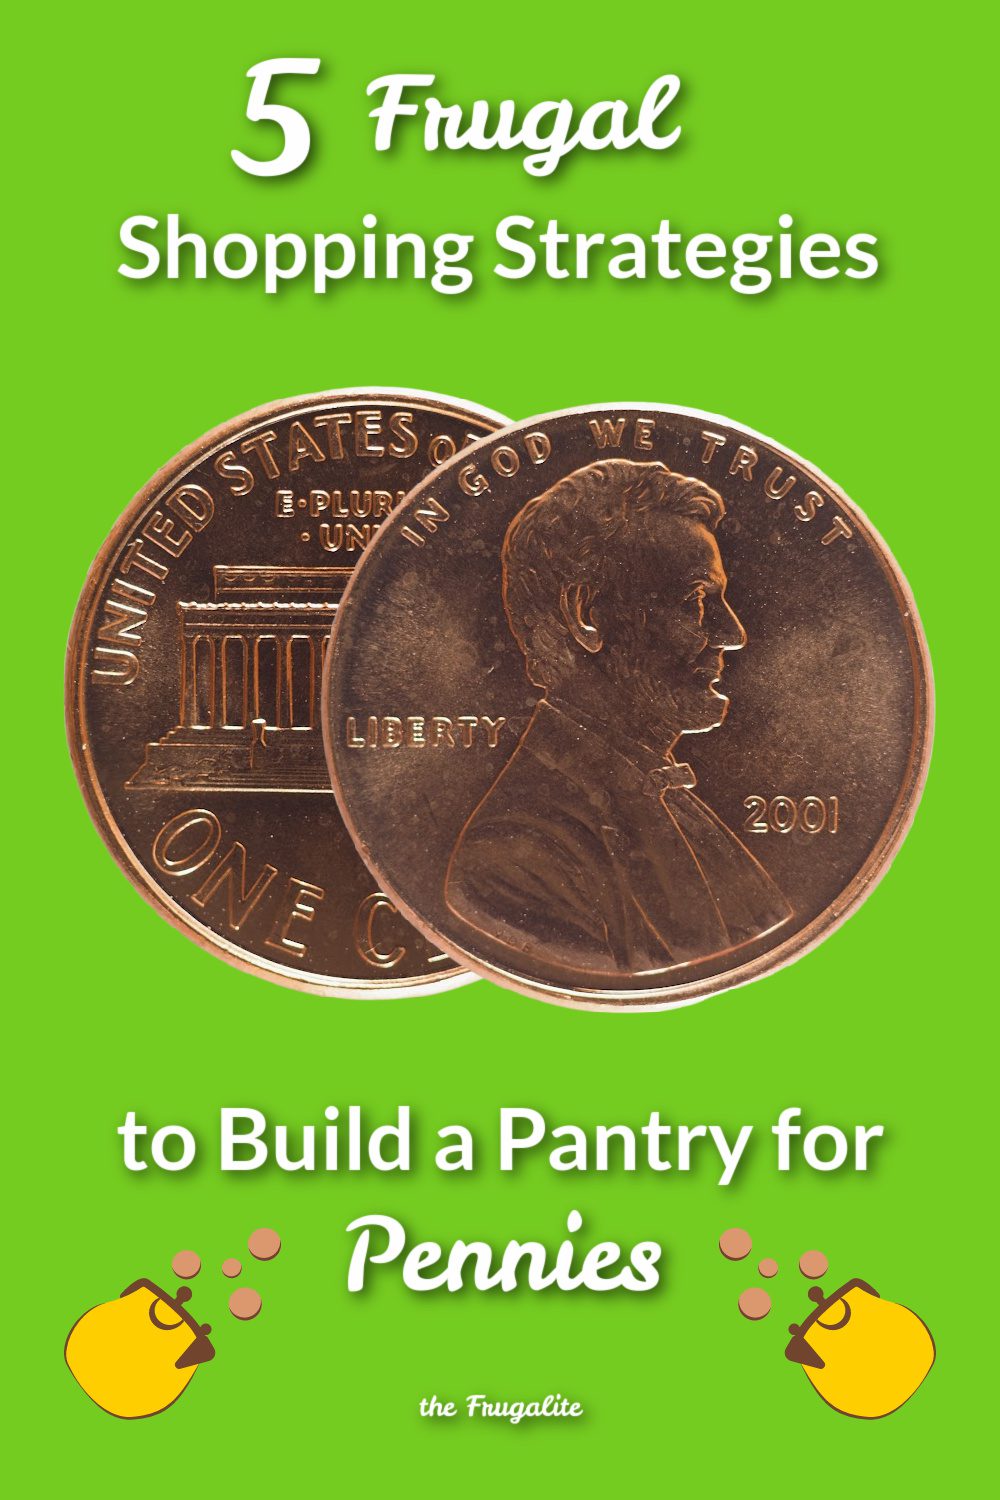 5 Frugal Shopping Strategies to Build a Pantry for Pennies